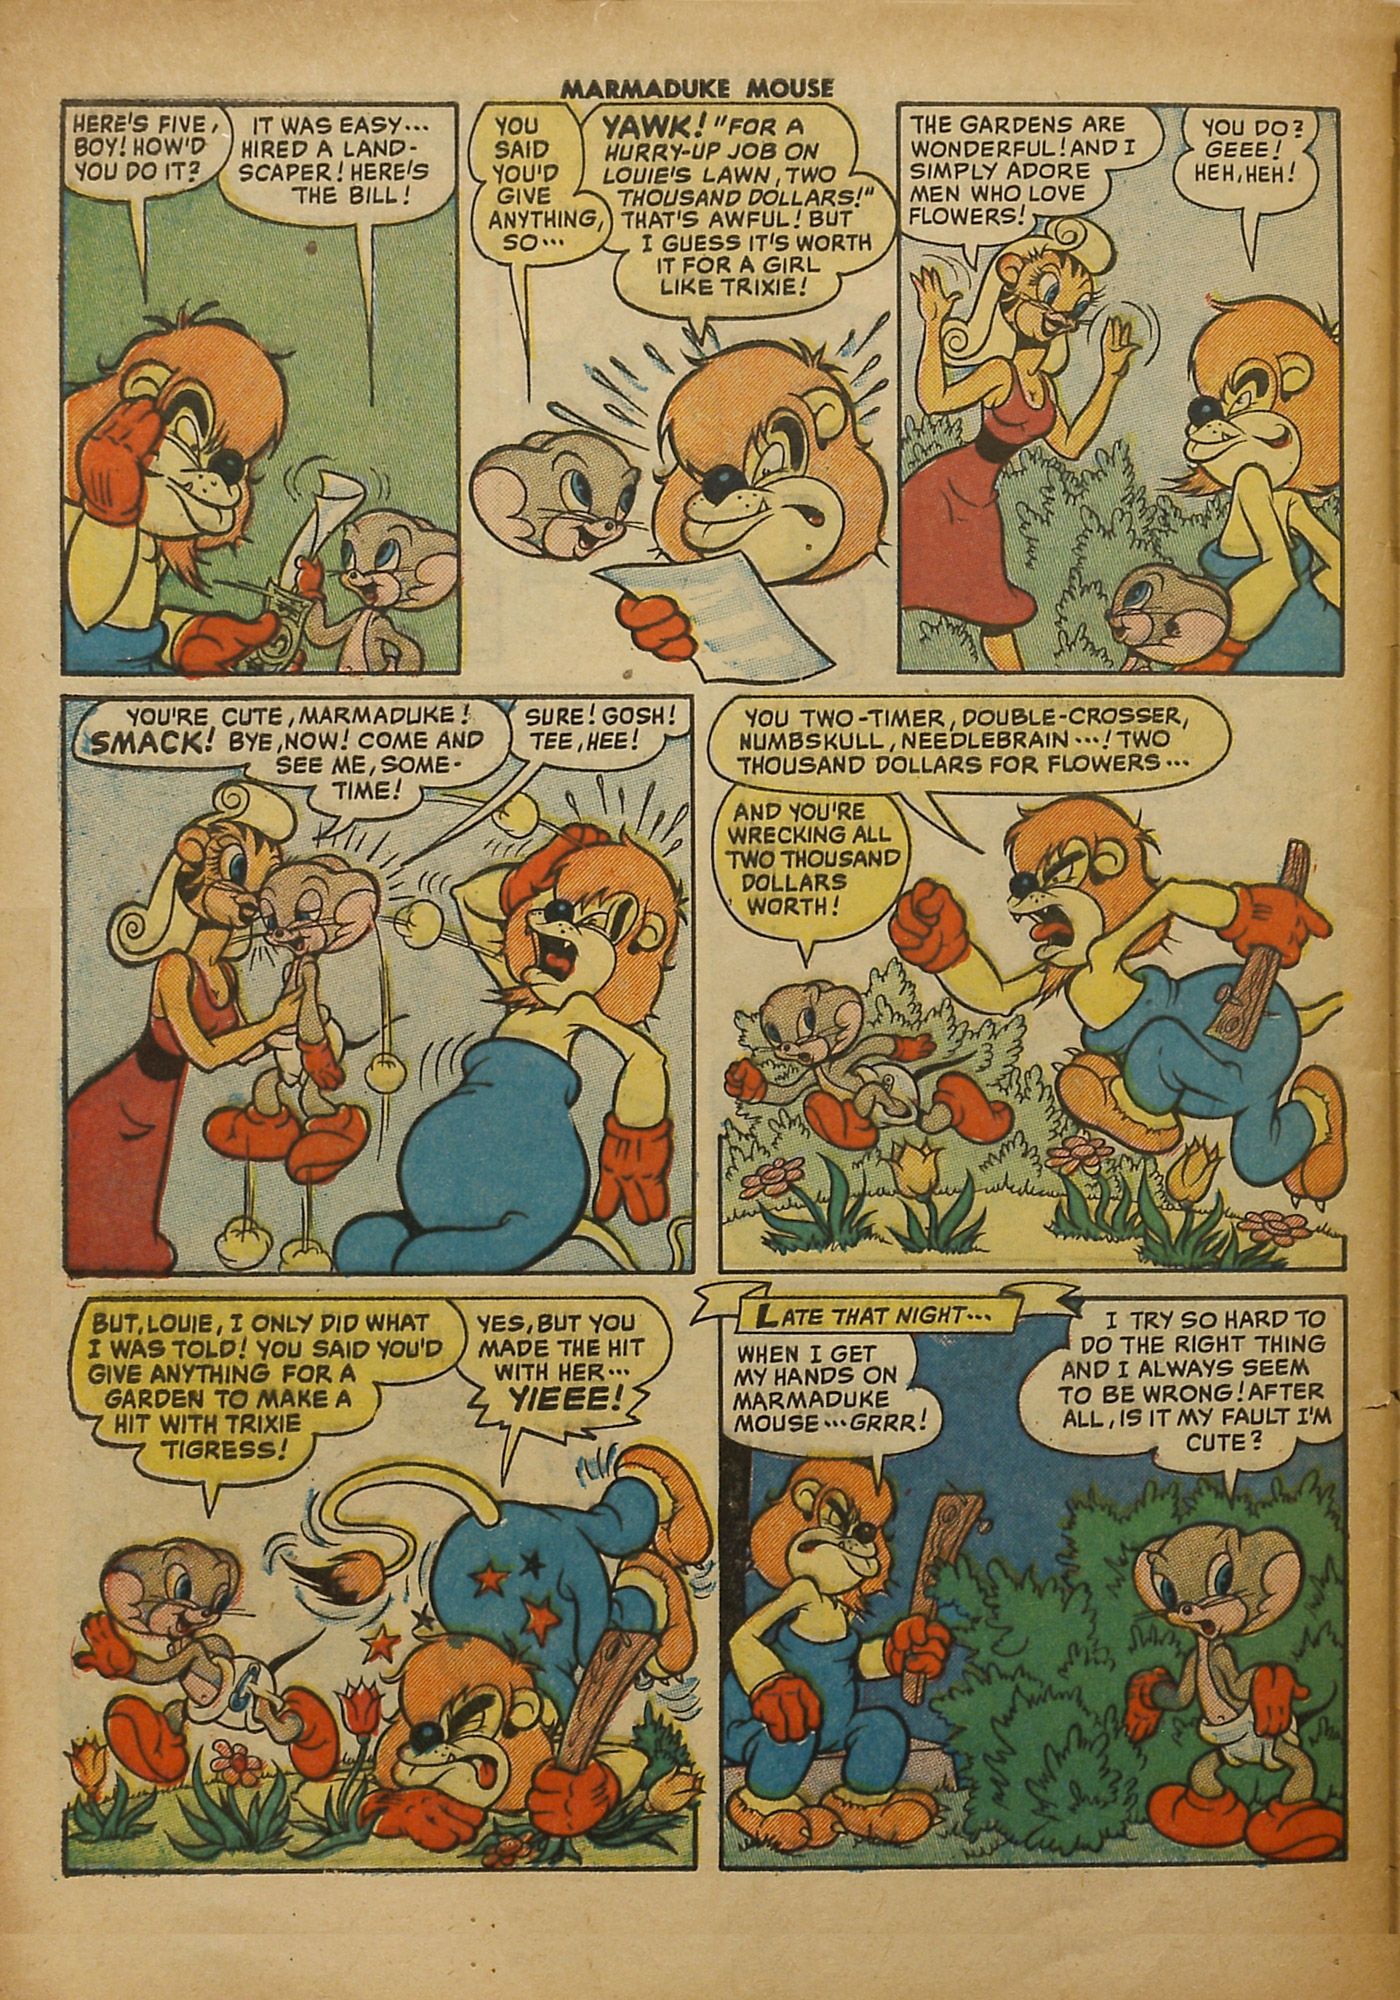 Read online Marmaduke Mouse comic -  Issue #32 - 32